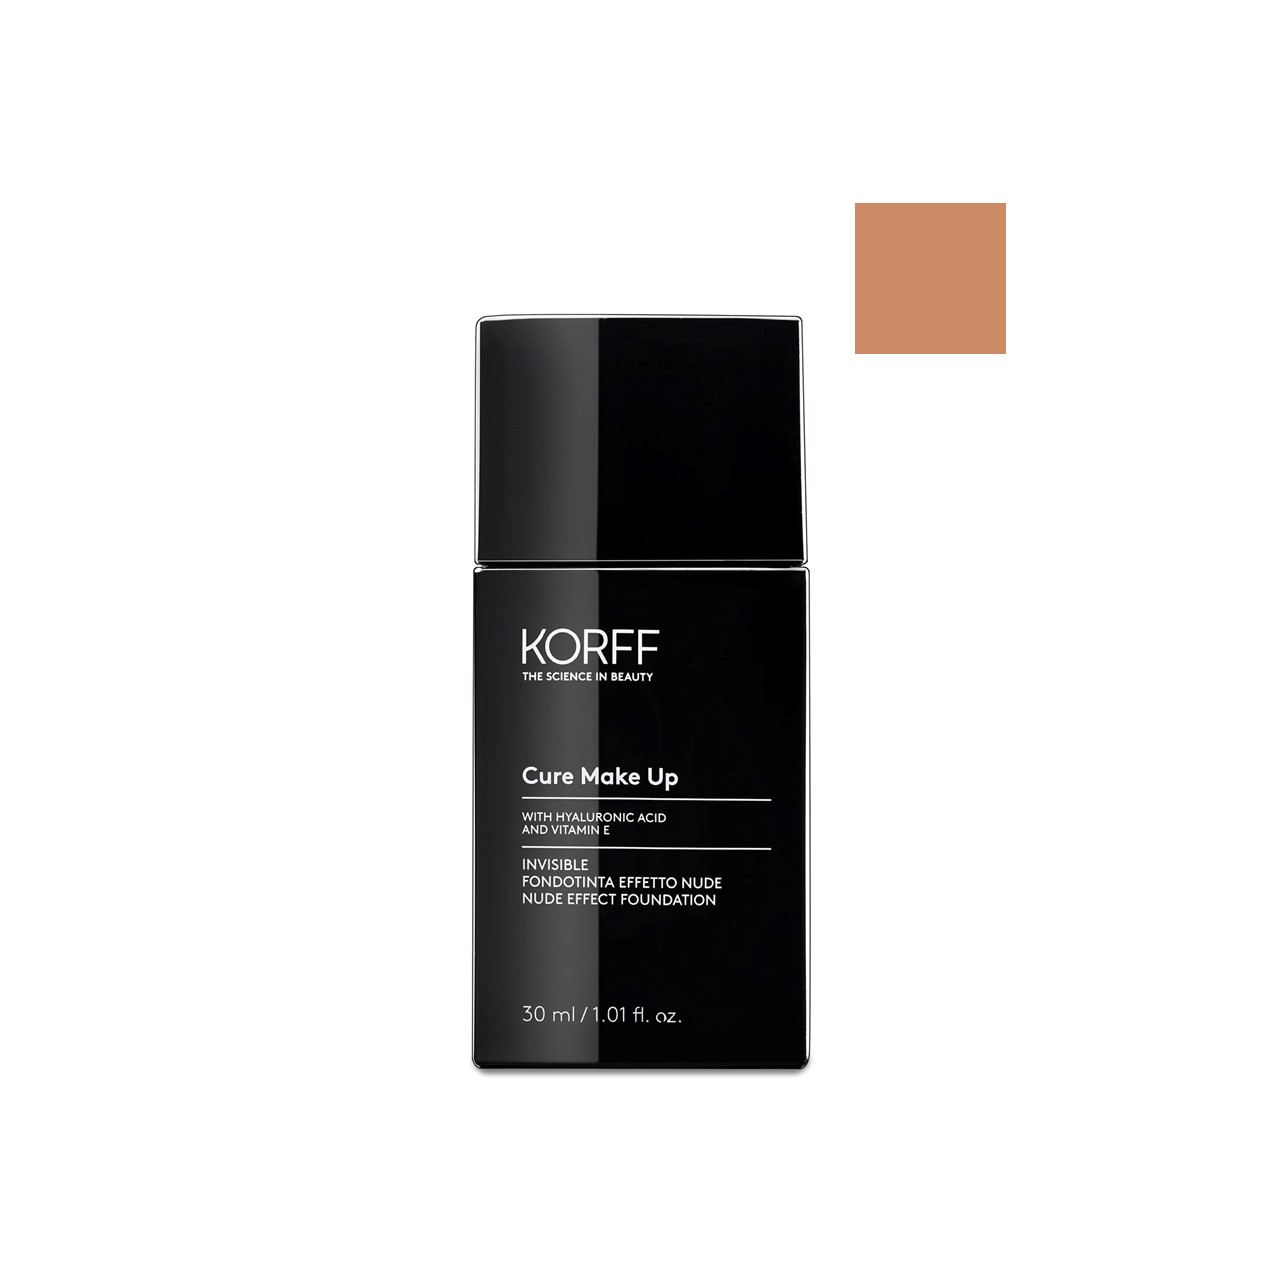 Korff Cure Make-Up Invisible Nude Effect Foundation 04 30ml (1.01 fl oz)